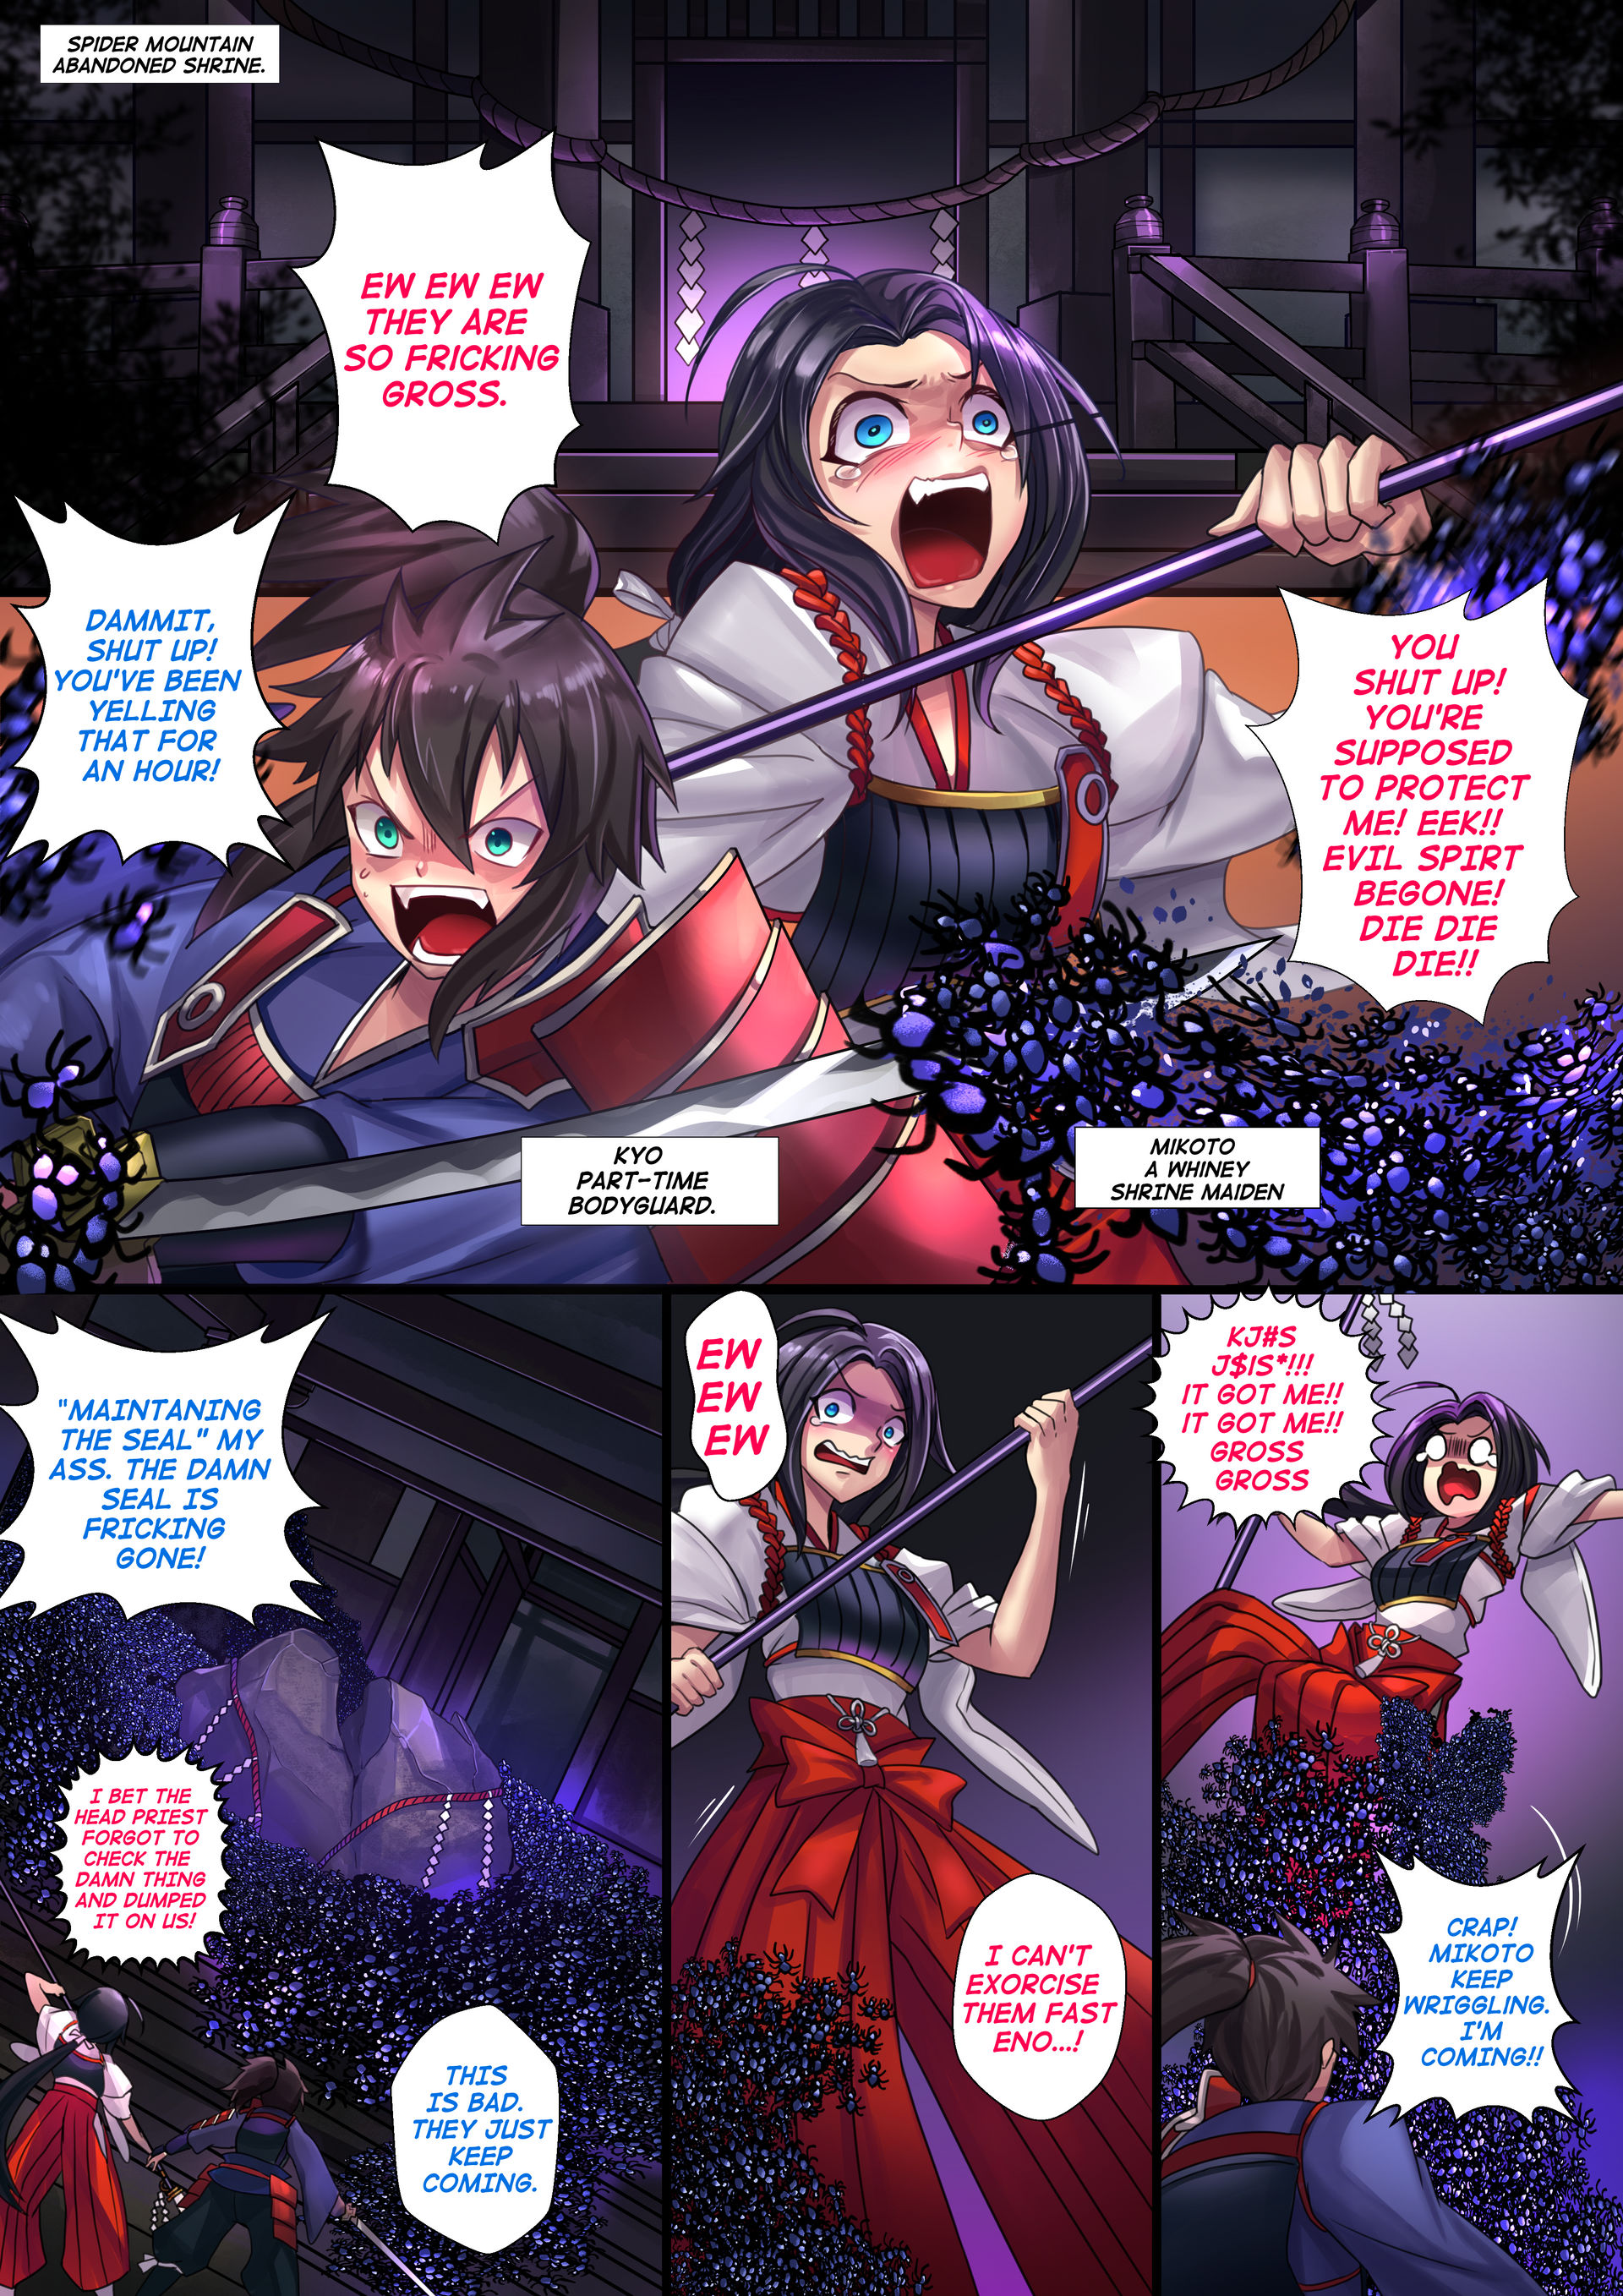 Ninja and the dark cult 2 page 8 by ibenz009 on DeviantArt